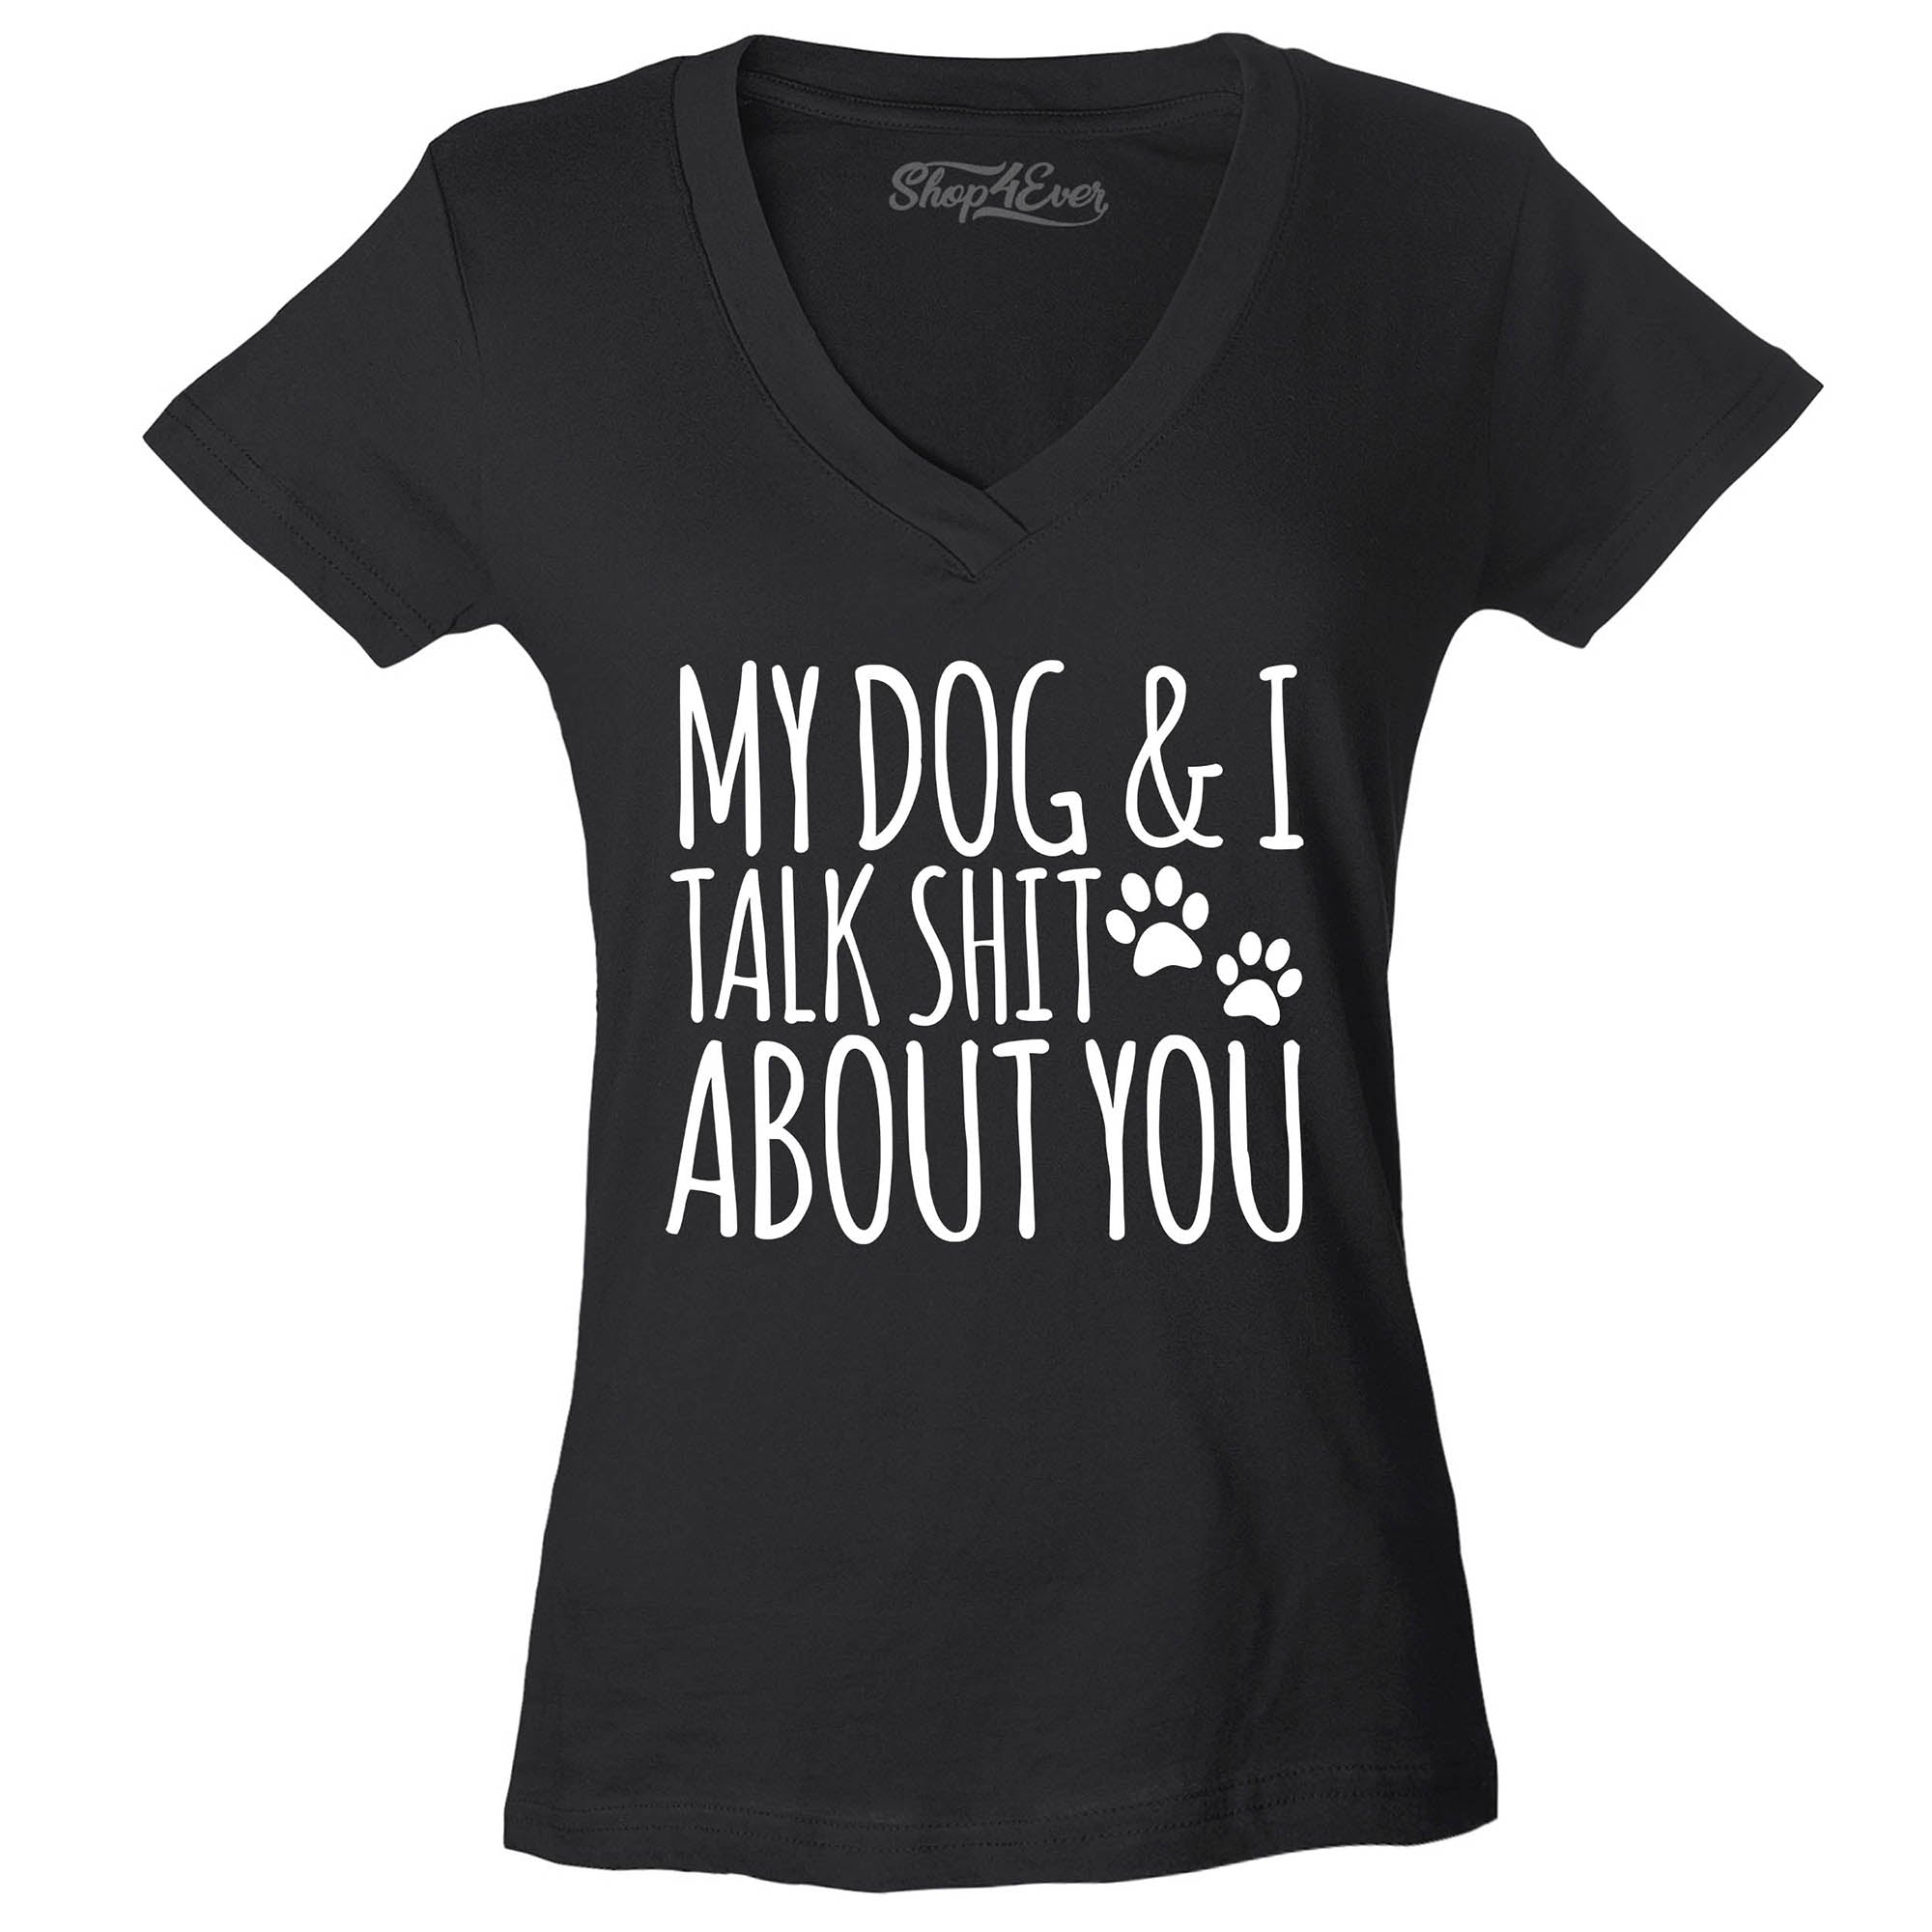 My Dog and I Talk Shit About You Women's V-Neck T-Shirt Slim Fit